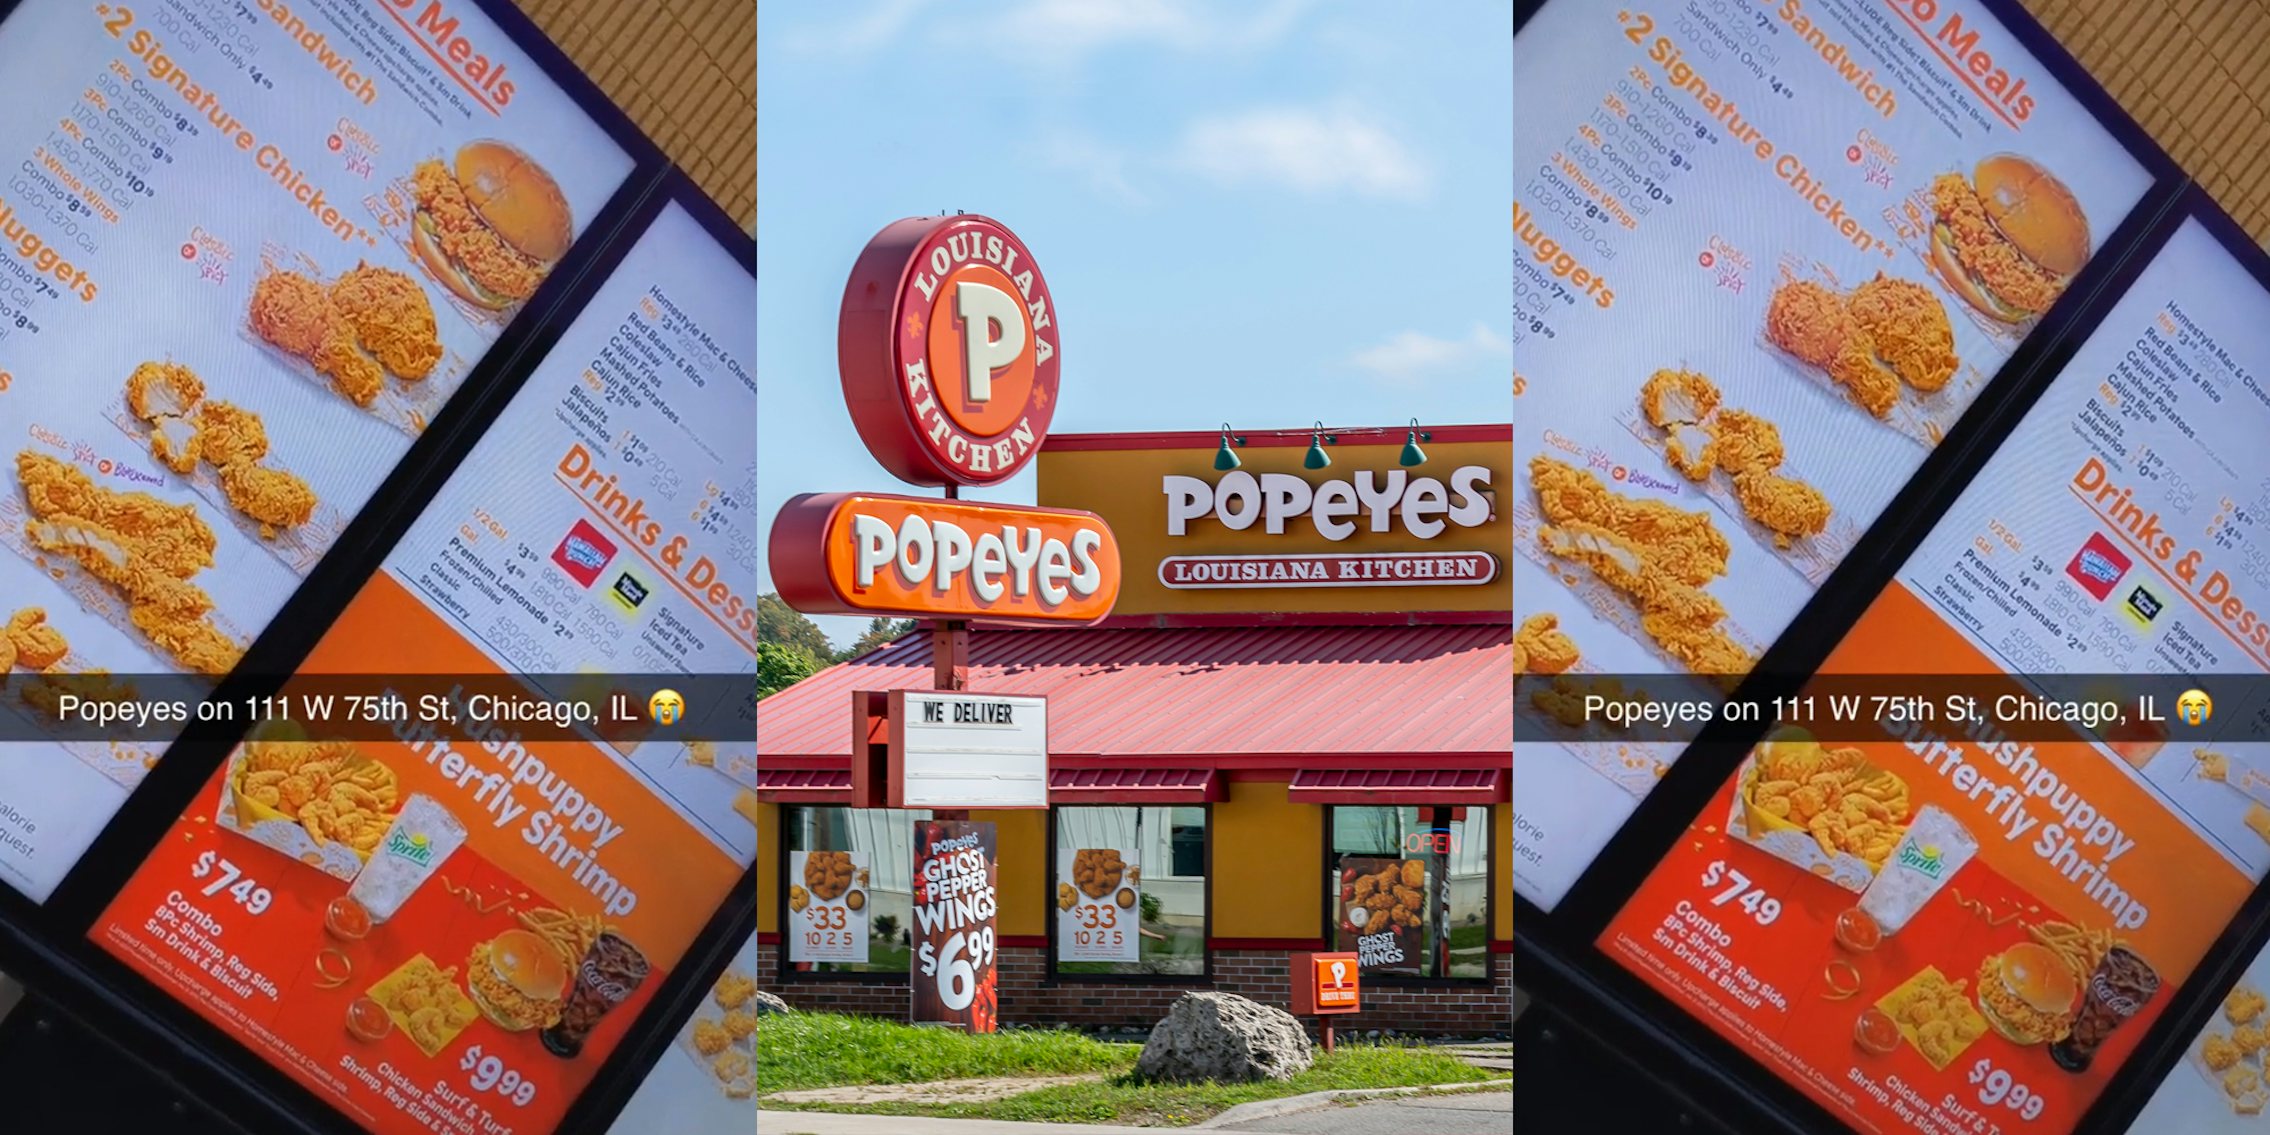 Popeyes drive thru menu with caption 'Popeyes on 111 W 75th St, Chicago, IL' (l) Popeyes building with signs (c) Popeyes drive thru menu with caption 'Popeyes on 111 W 75th St, Chicago, IL' (r)